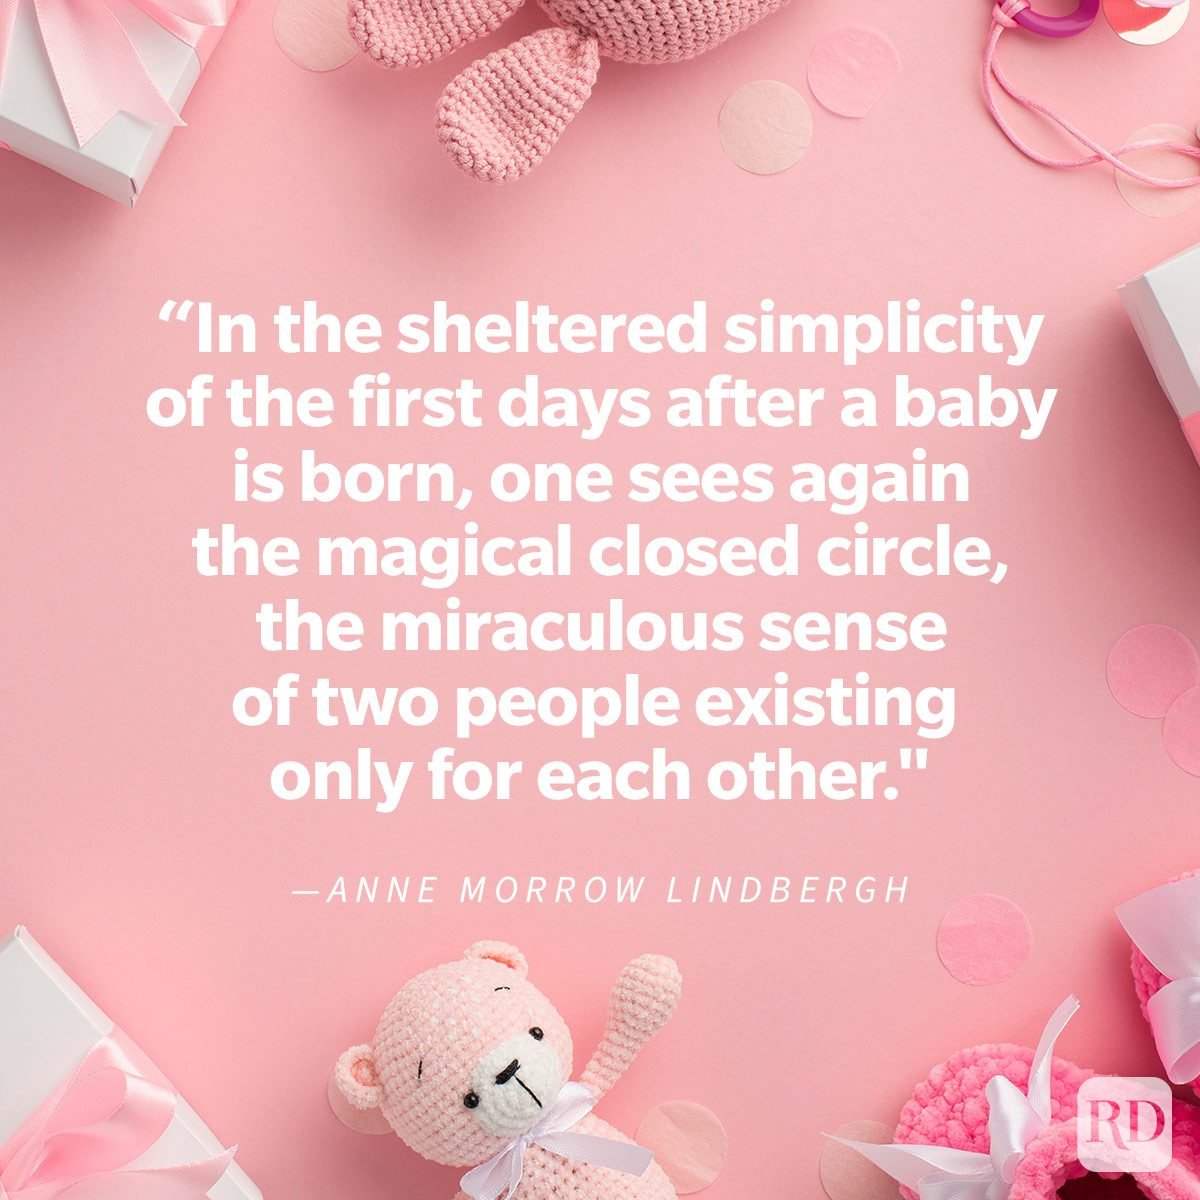 sweet baby wishes to send to expectant parents on baby toys and items background flat lay “In the sheltered simplicity of the first days after a baby is born, one sees again the magical closed circle, the miraculous sense of two people existing only for each other." by Anne Morrow Lindbergh